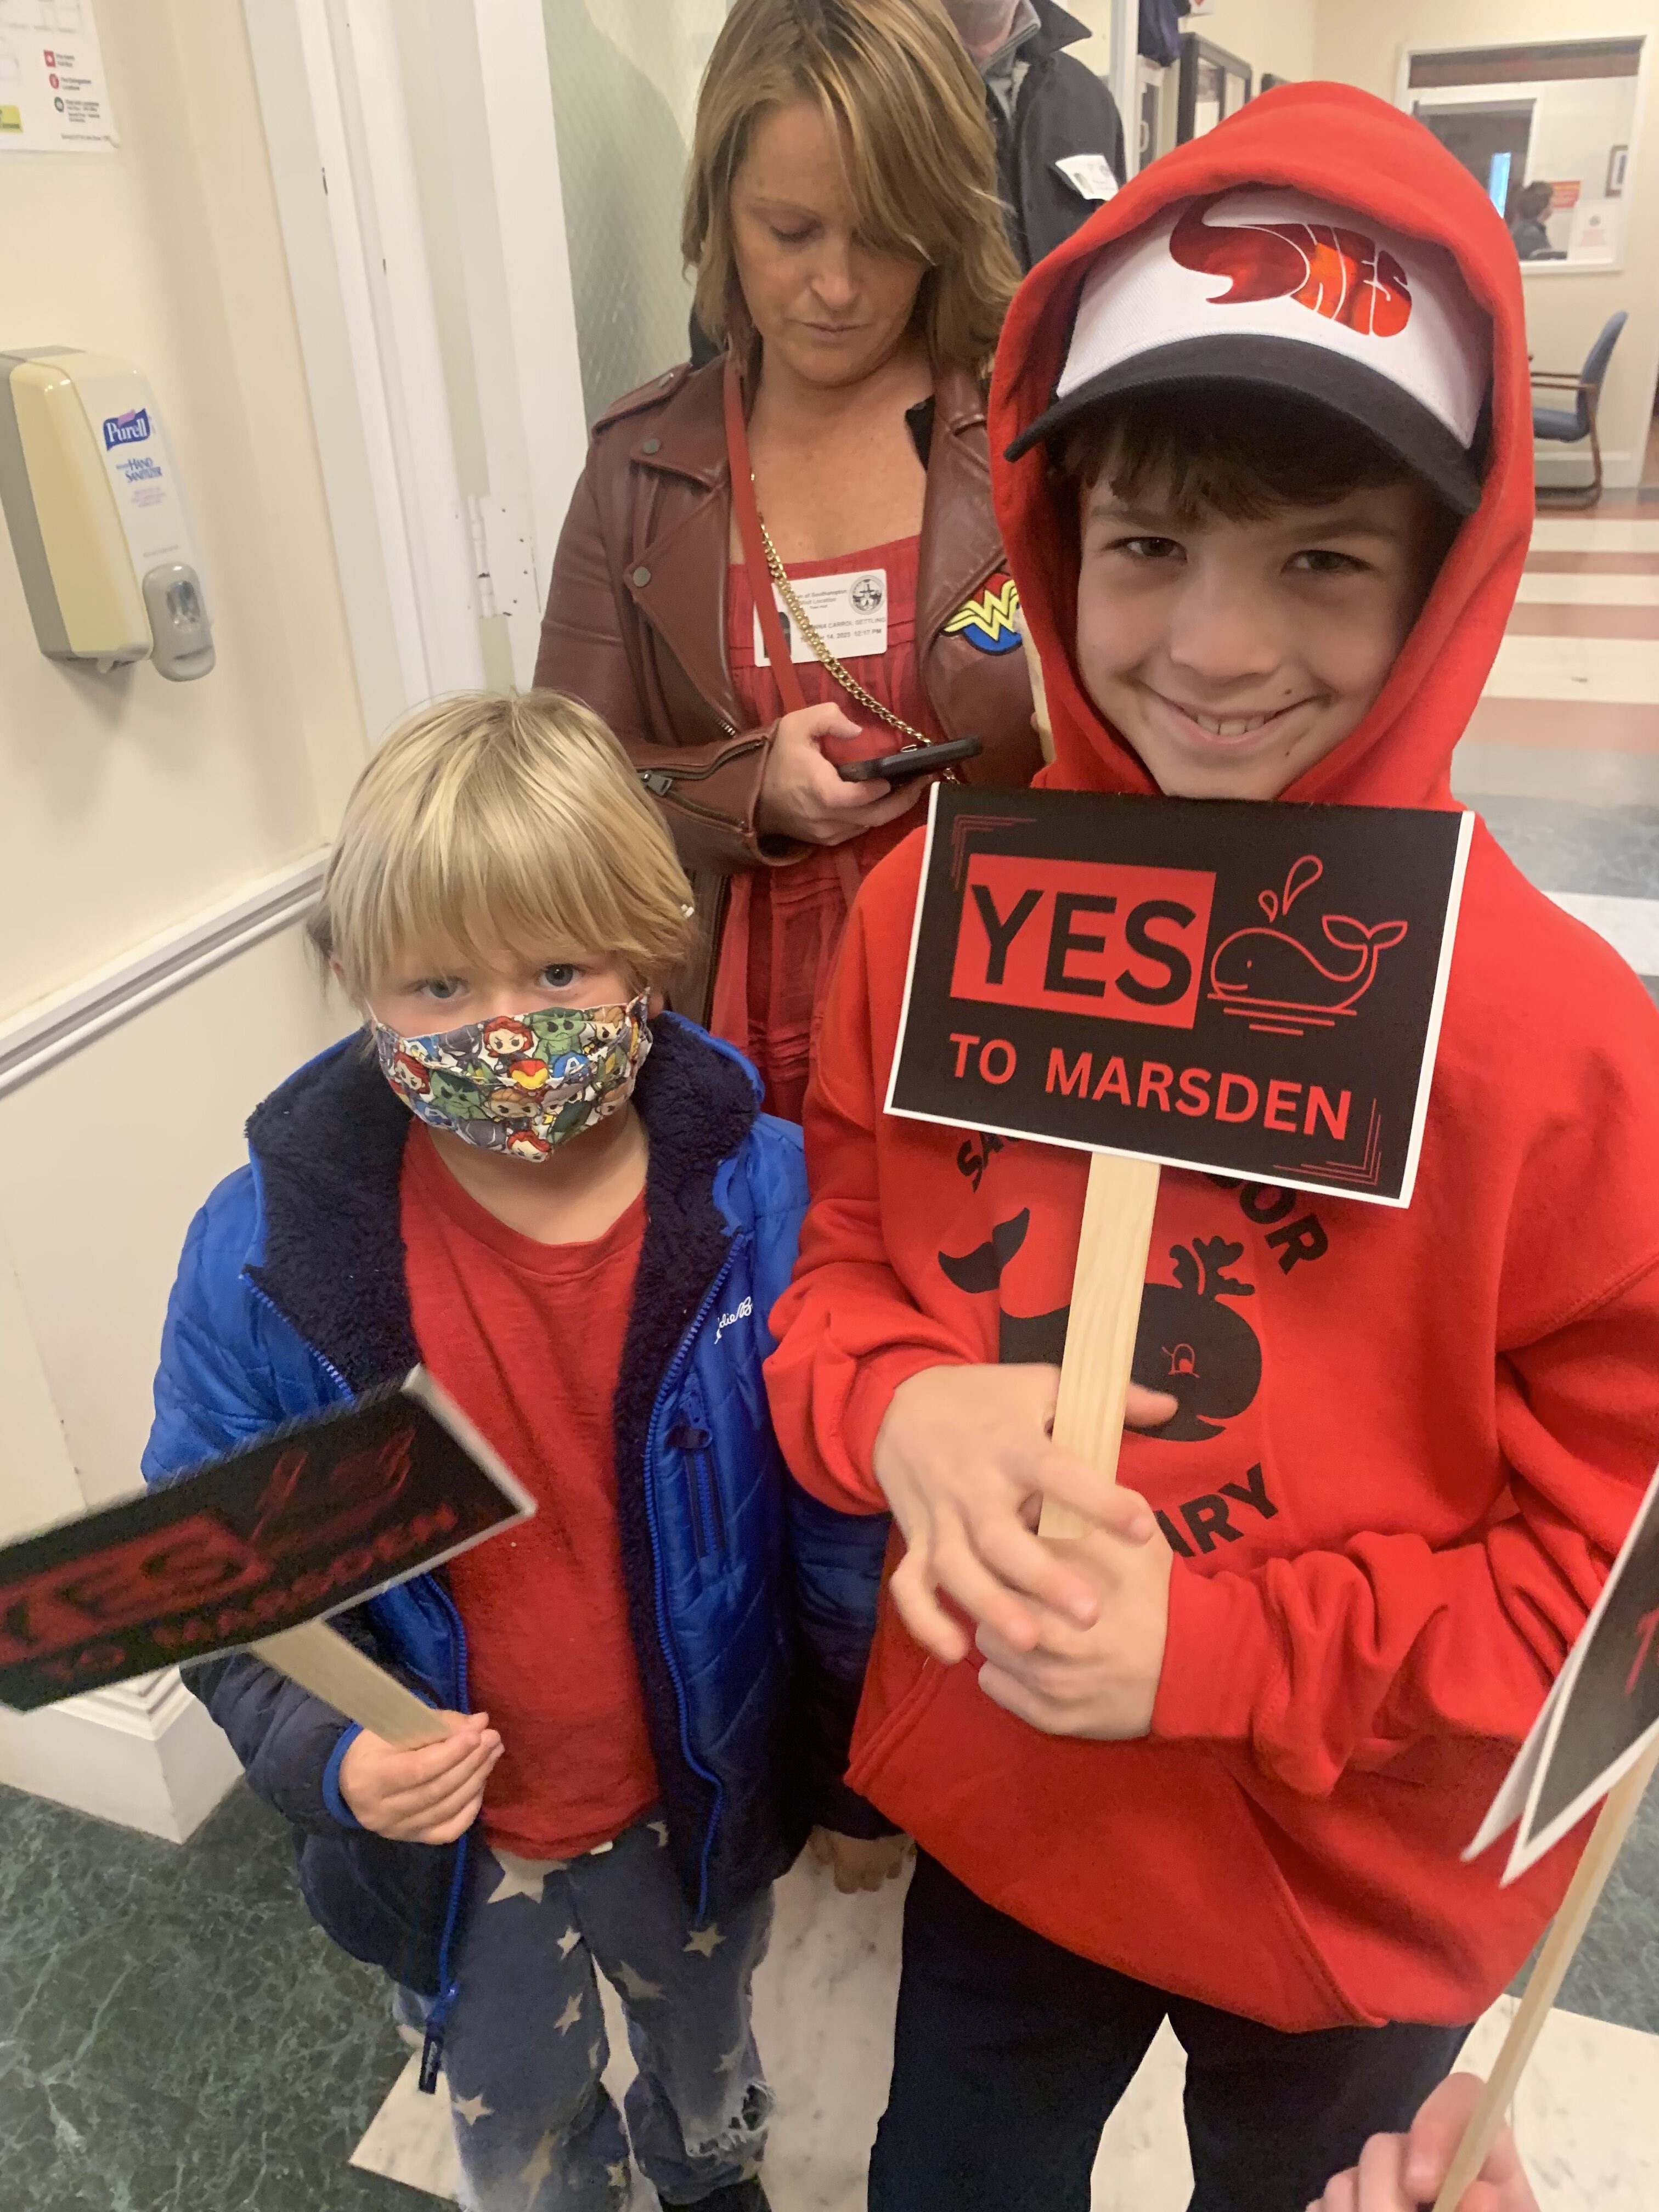 Sag Harbor School District students were among the members of the public who showed up at the most recent Southampton Town Board public hearing on Marsden on March 14, with those in support sporting homemade signs.